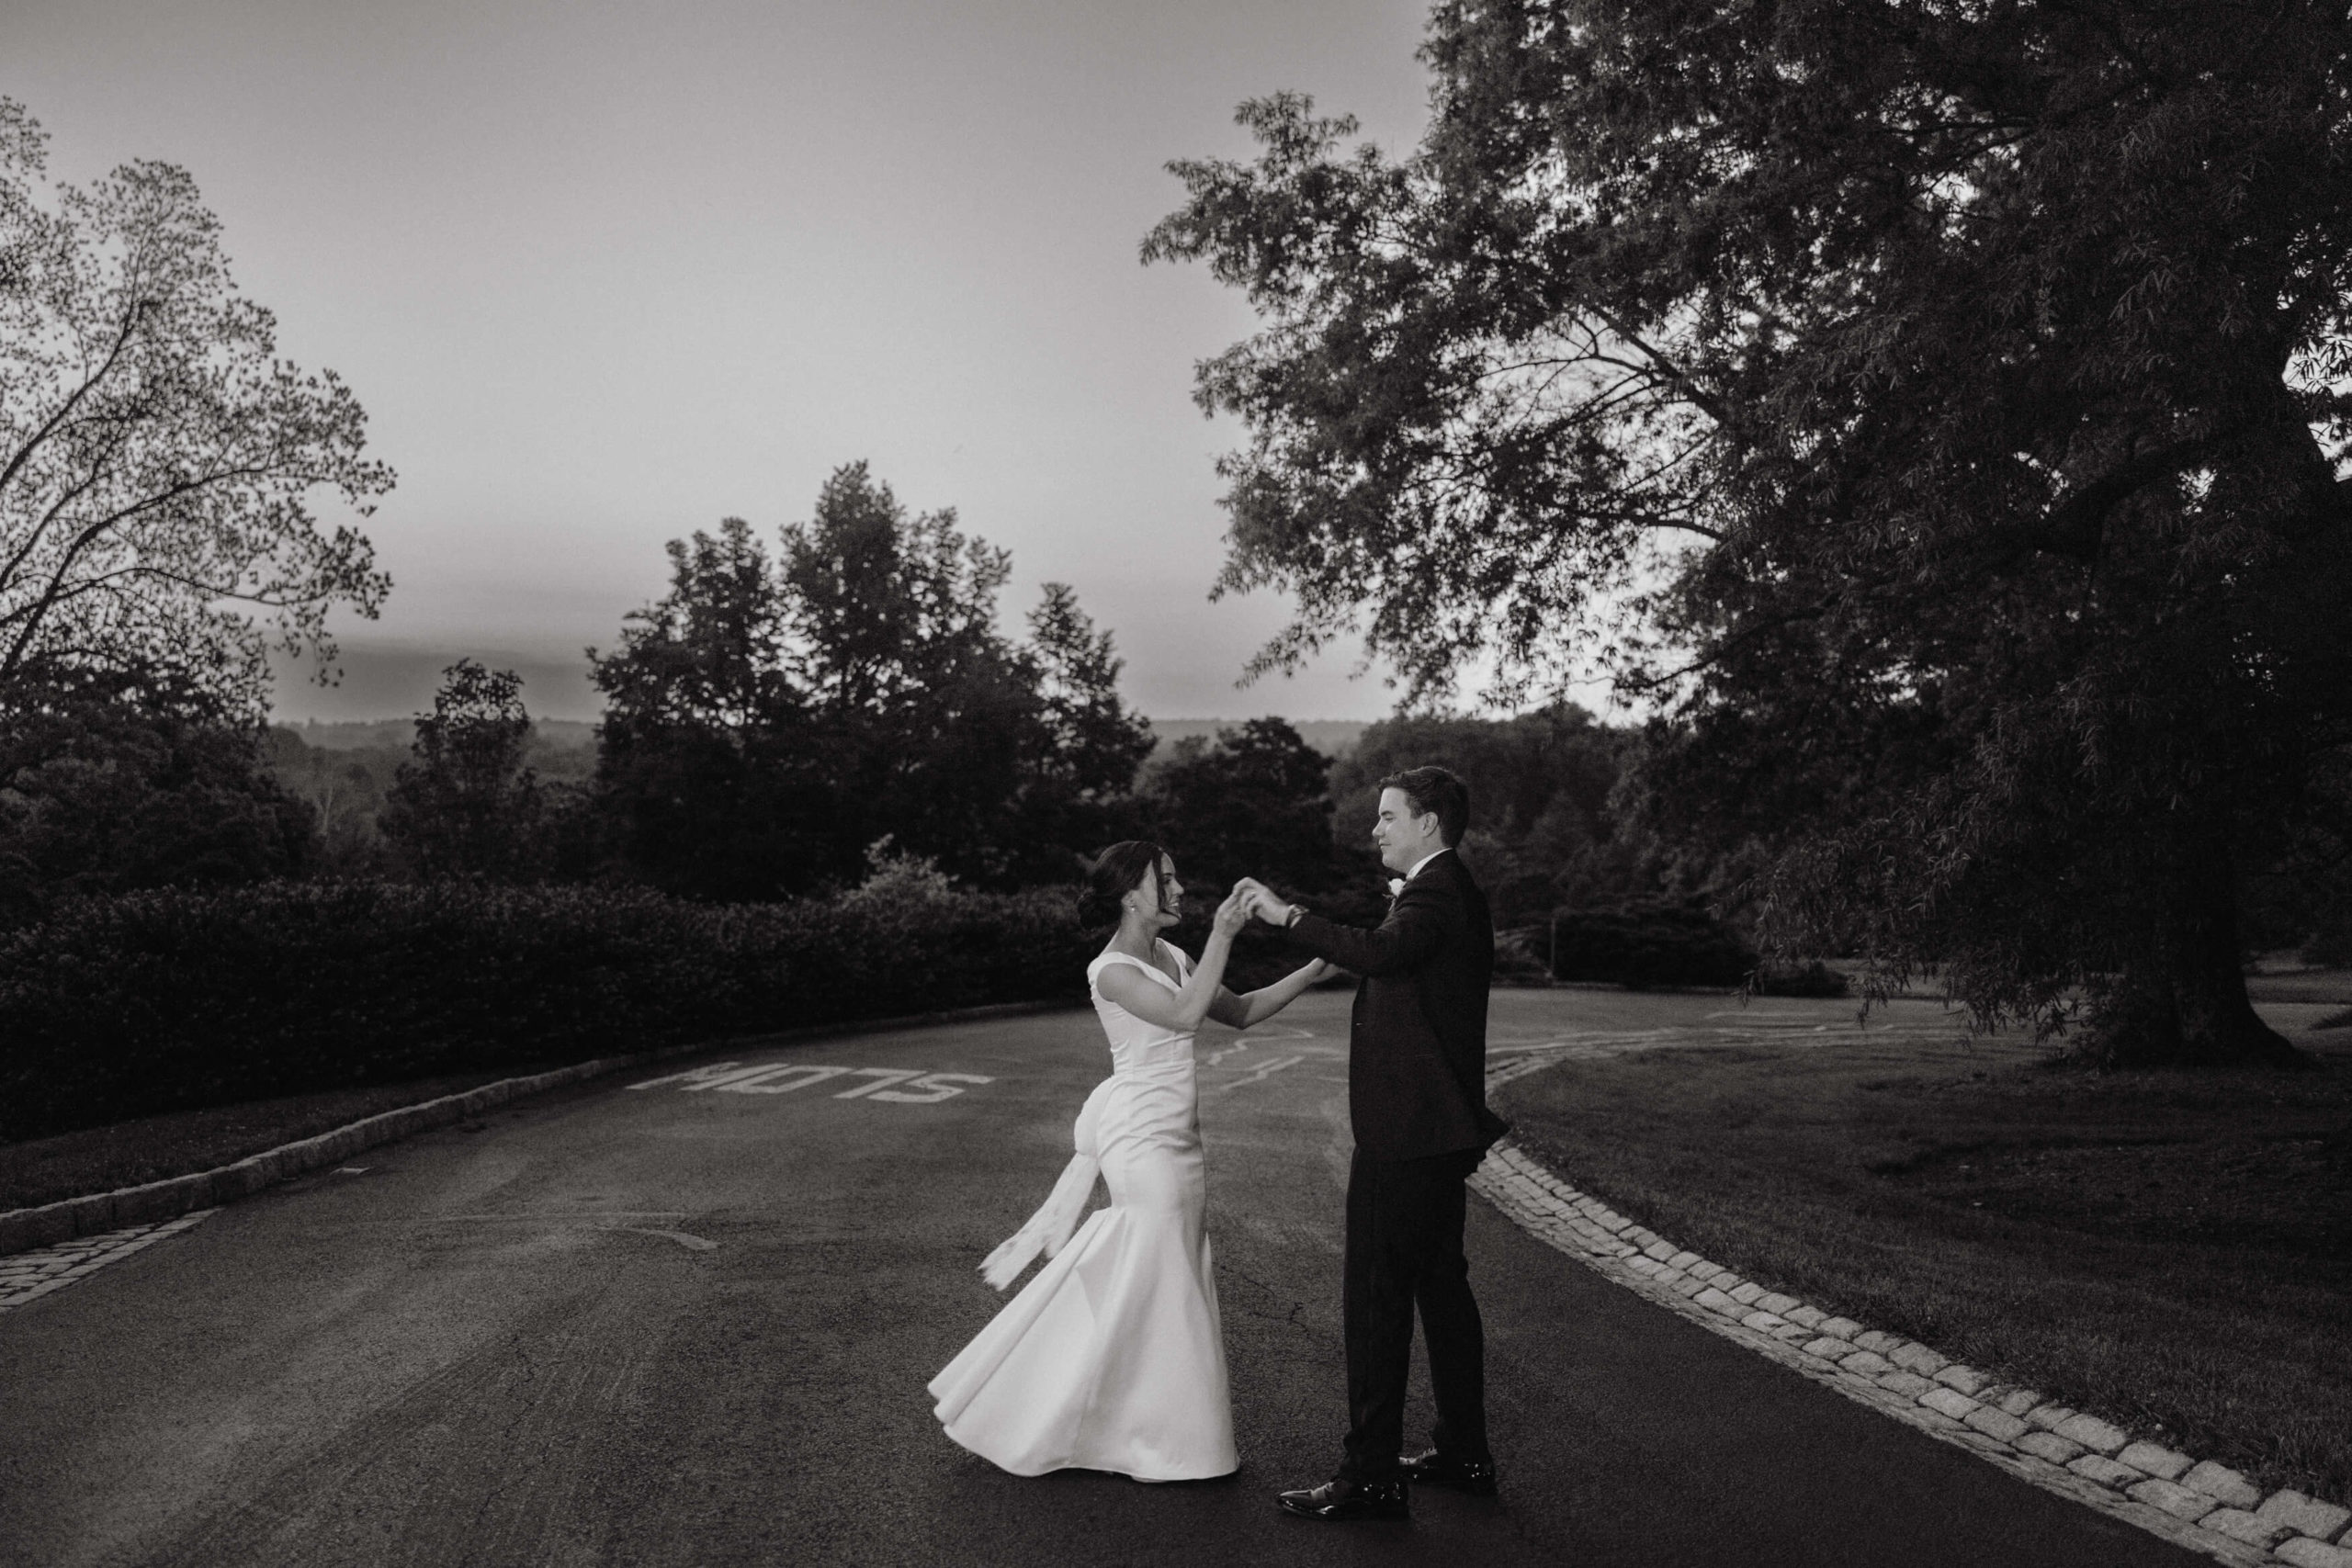 Editorial image of the newly-weds dancing in the middle of the road. Image by Jenny Fu Studio